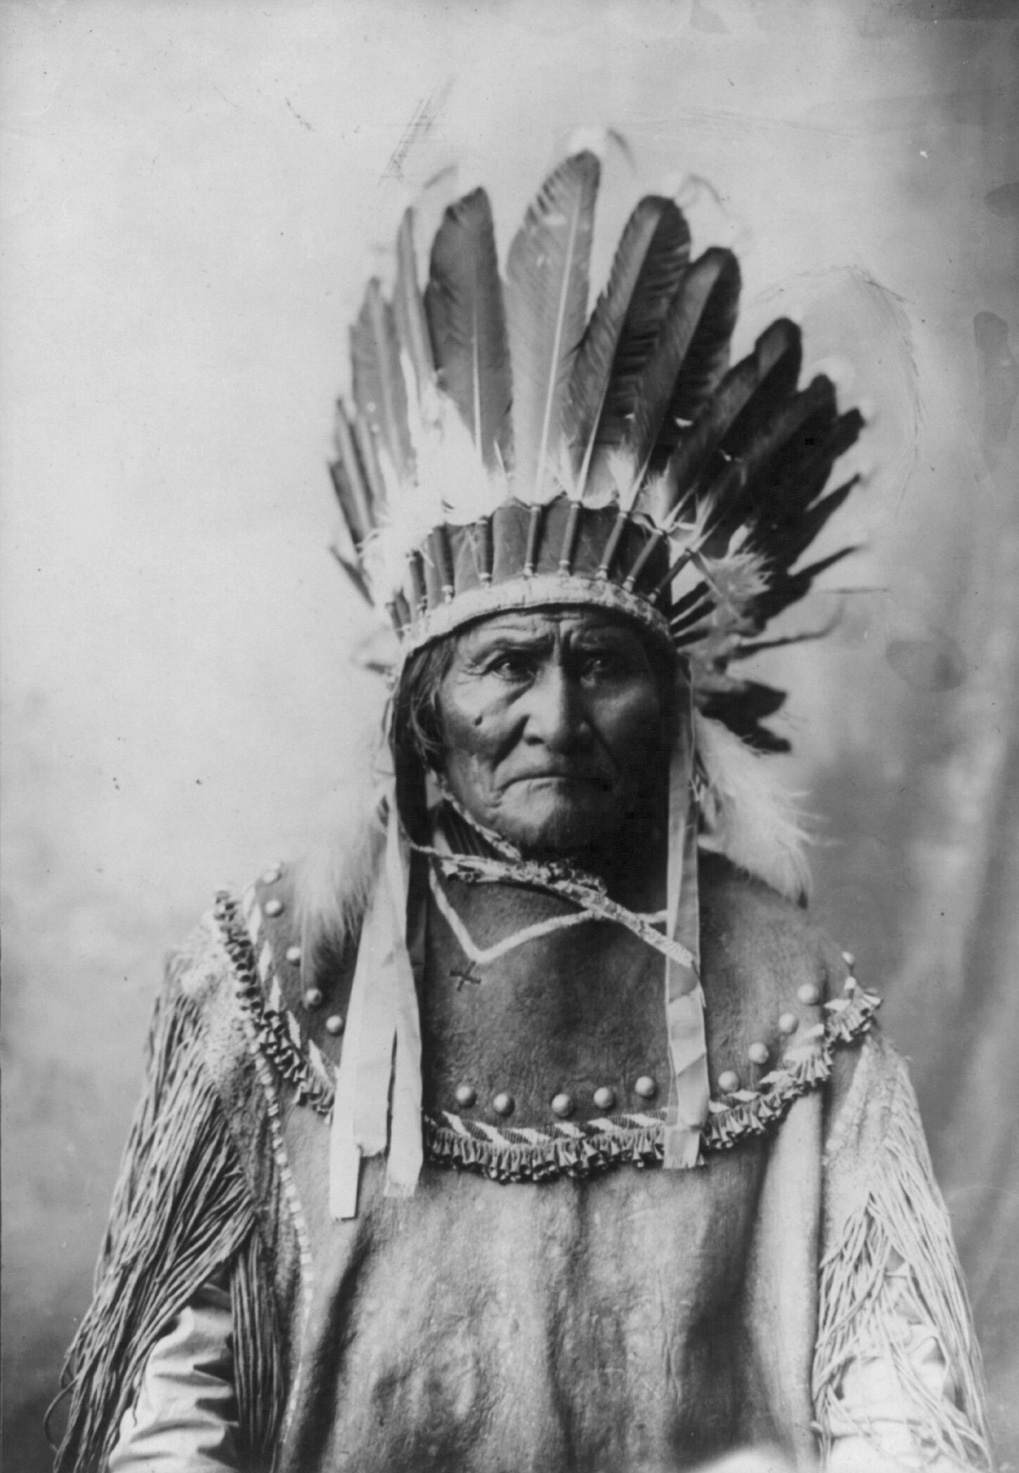 American Indian Wars: after almost 30 years of fighting, Apache leader Geronimo, with his remaining warriors, surrenders to General Nelson Miles in Arizona